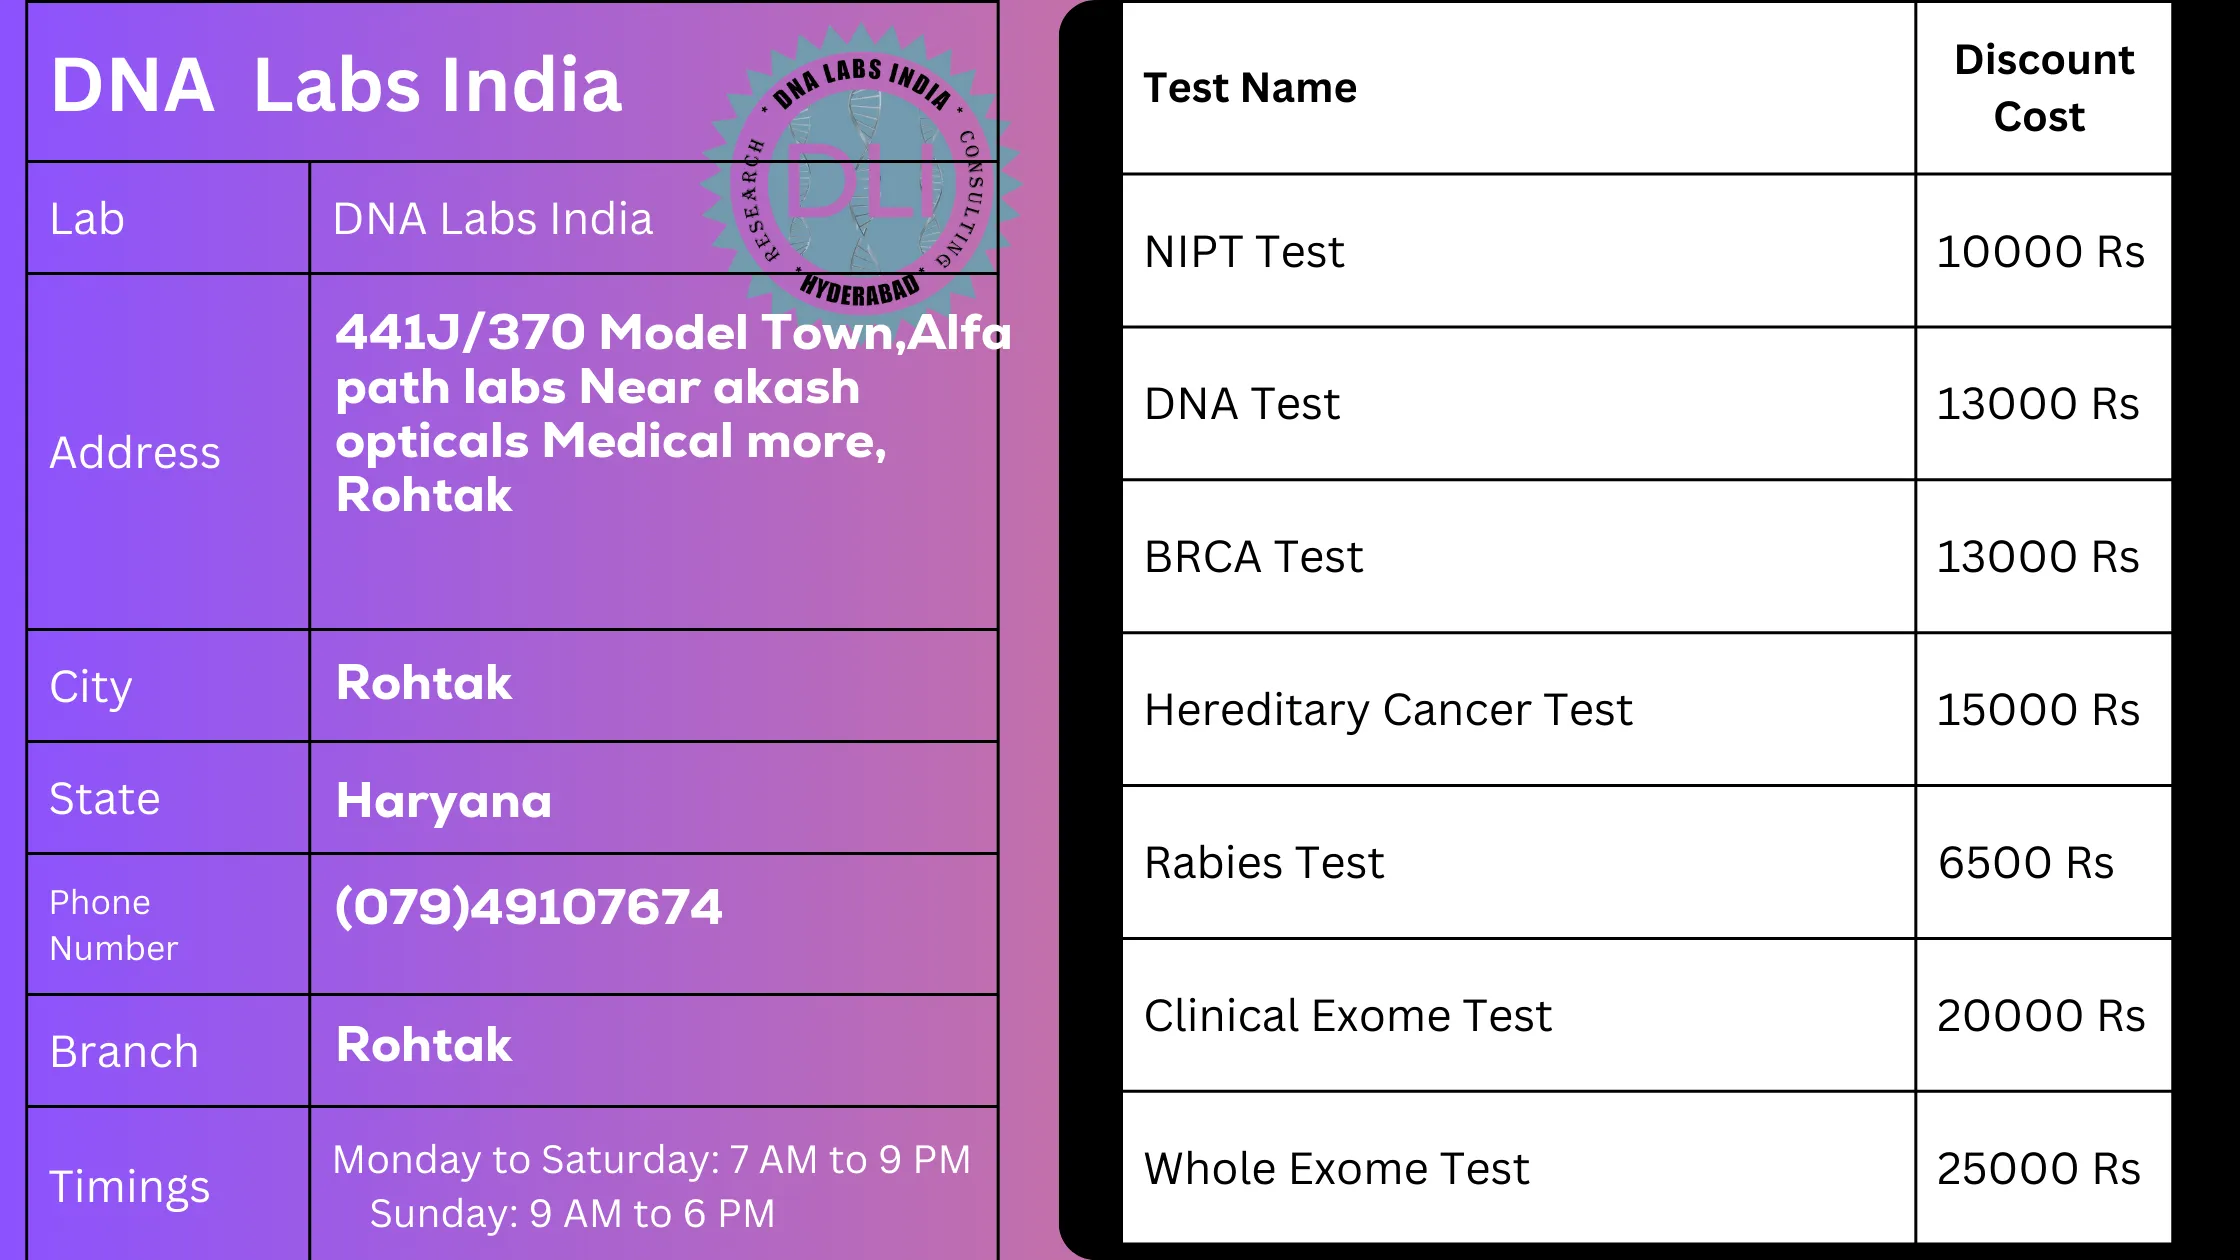 DNA Labs India - Rohtak: Your Trusted Partner for Genetic Testingn